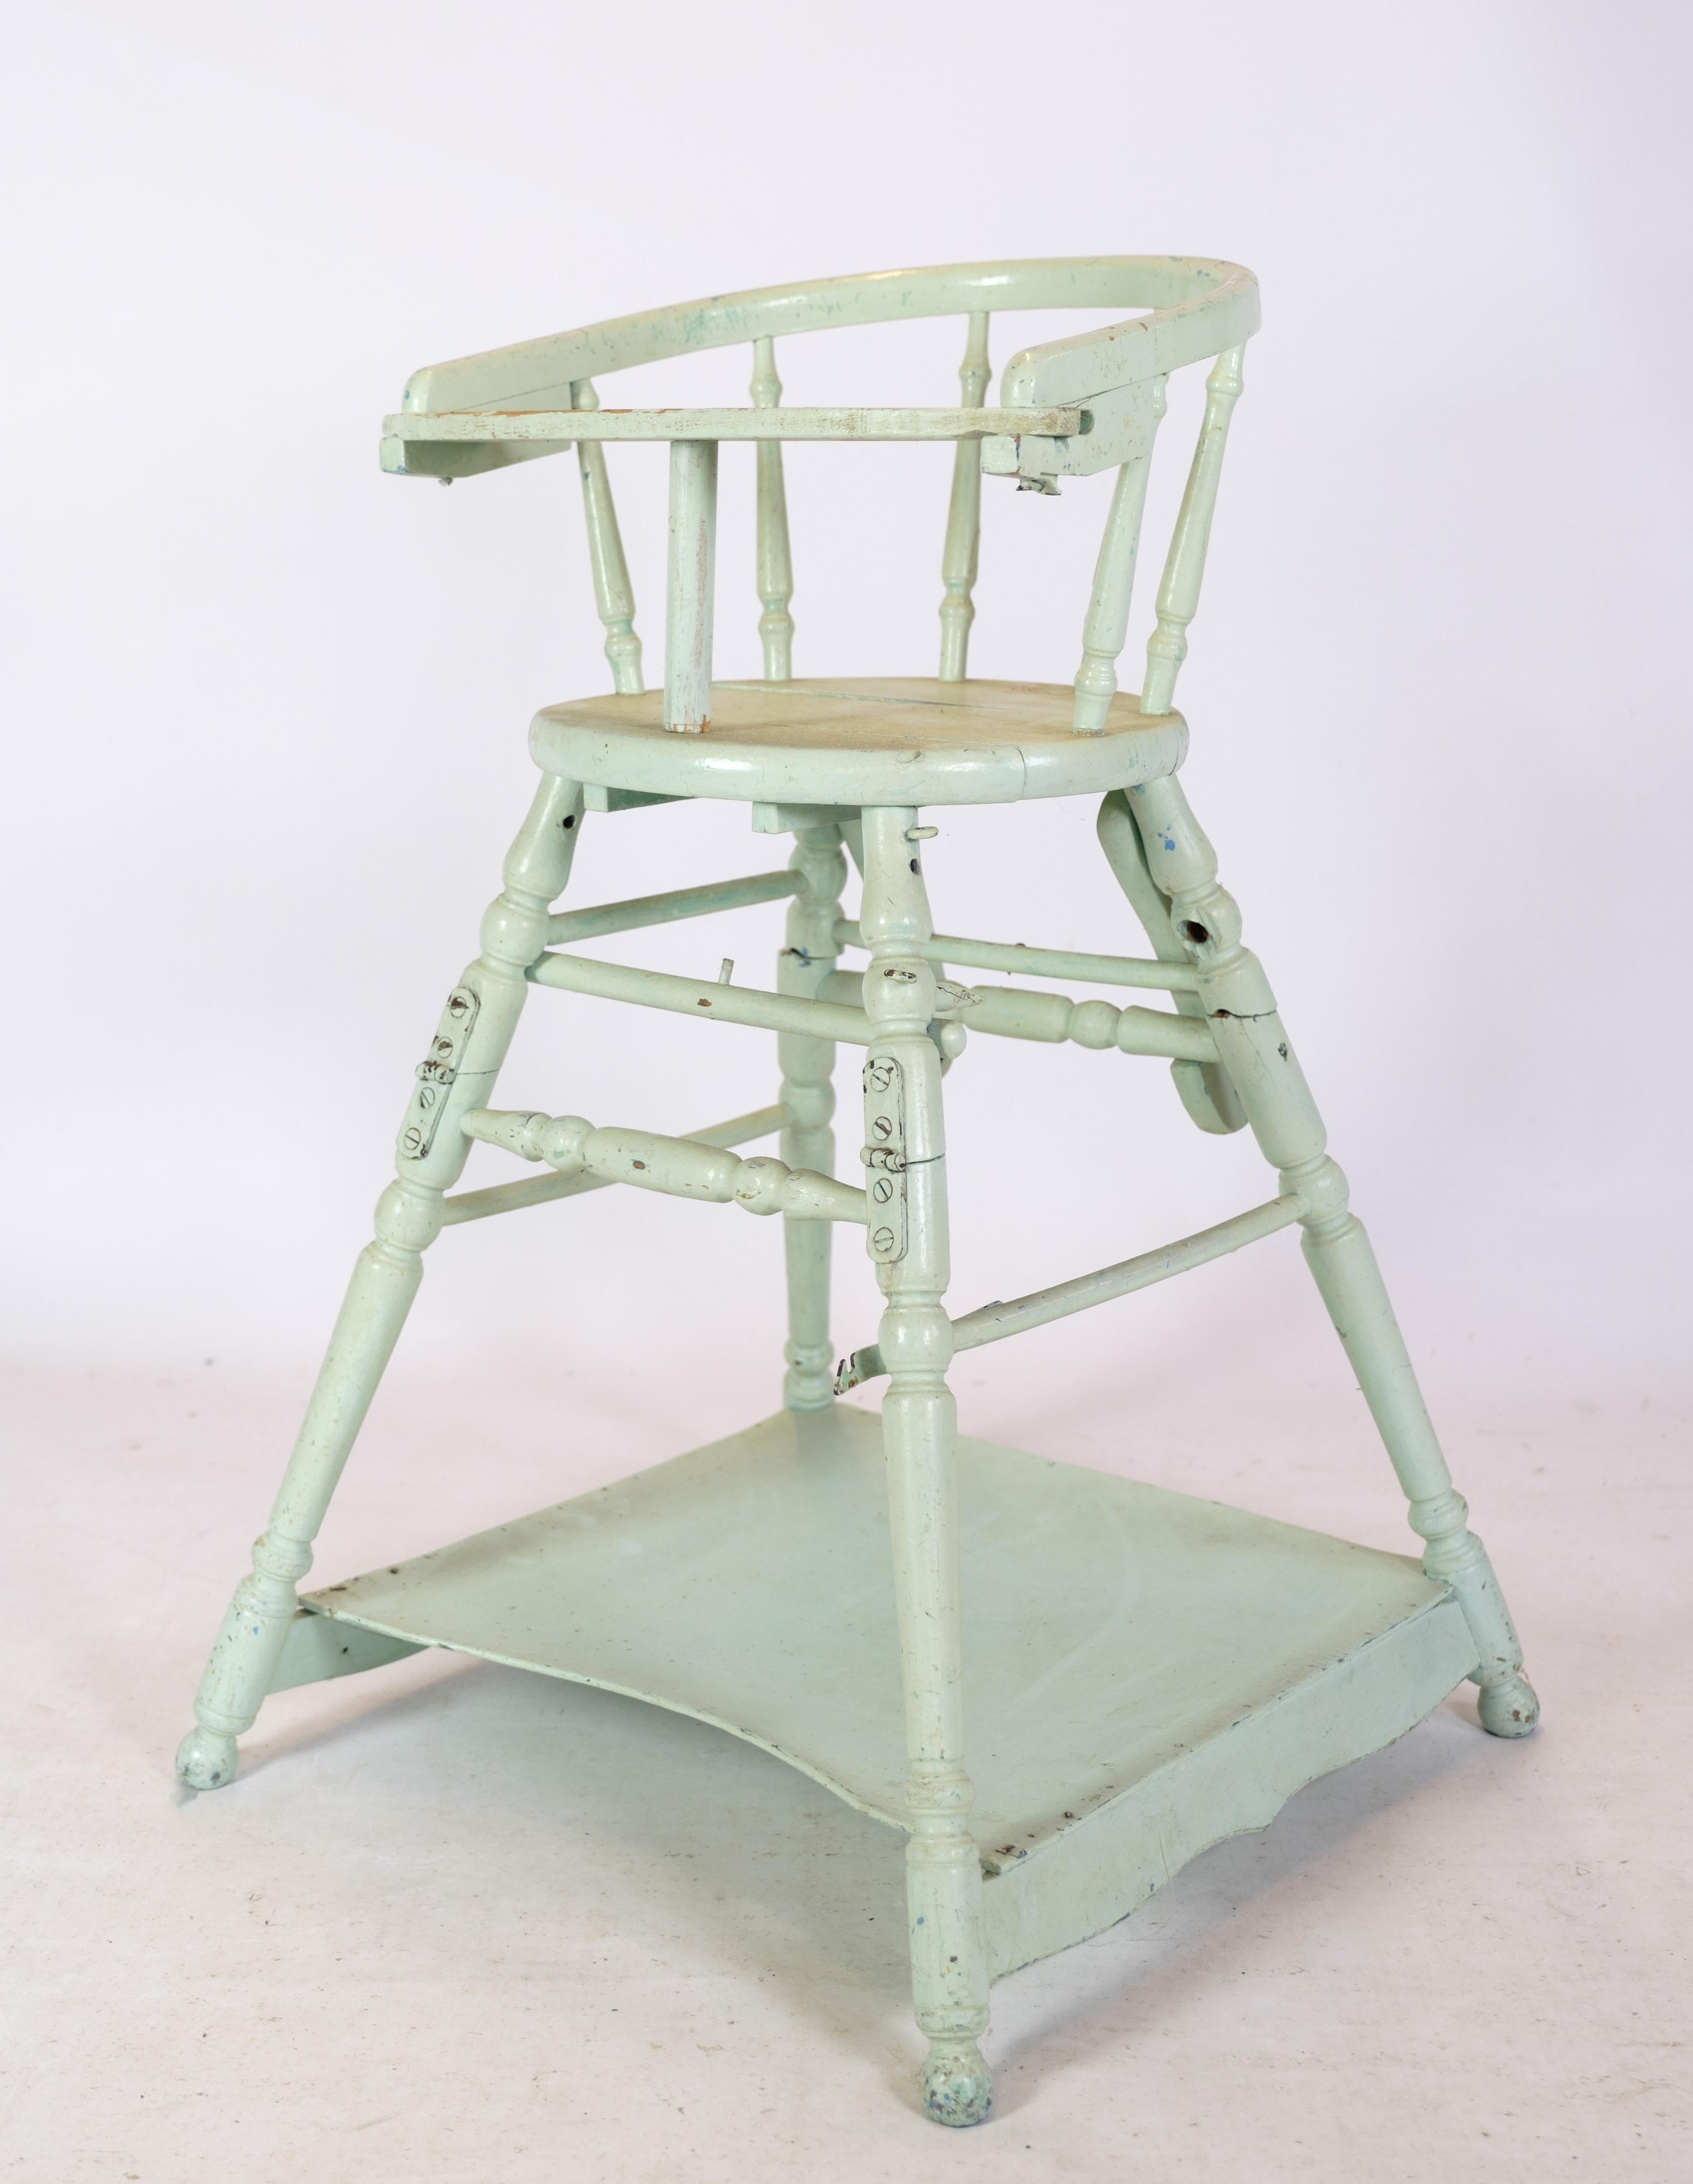 Adjustable children's chair in light blue with patina from around the 1920s.
Measurements in cm: H:79 W:52 D:52